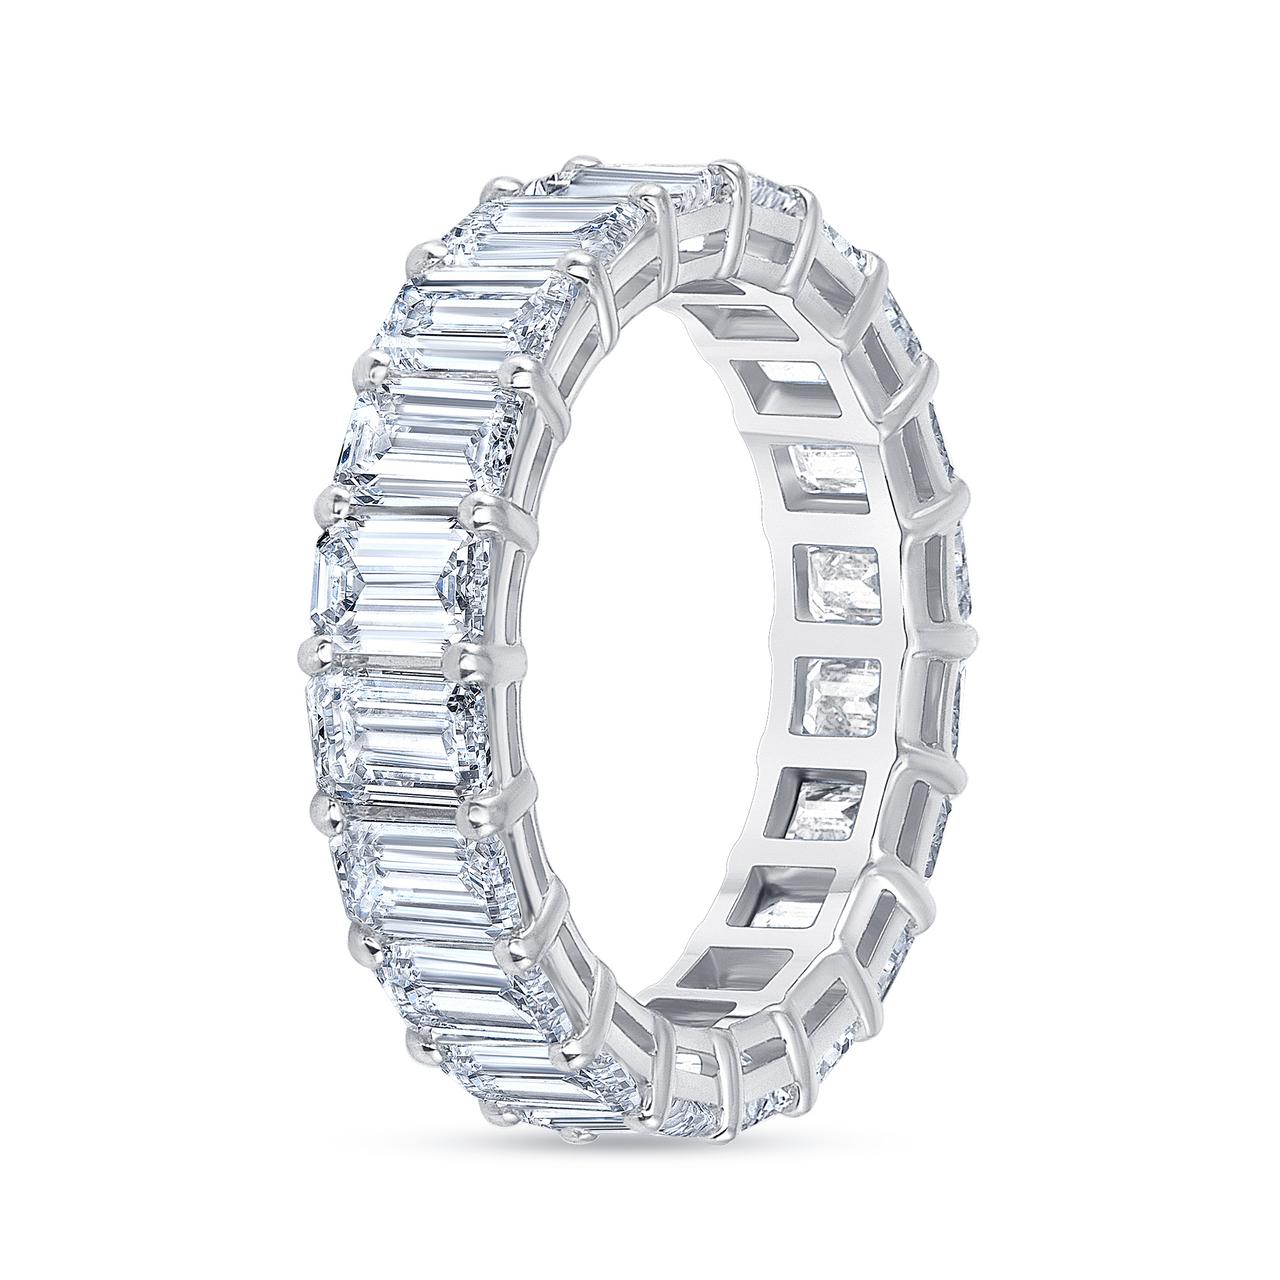 Women's or Men's HRD Certified 5.65 Carat Emerald Cut White Diamond Eternity Ring / Band Rings For Sale